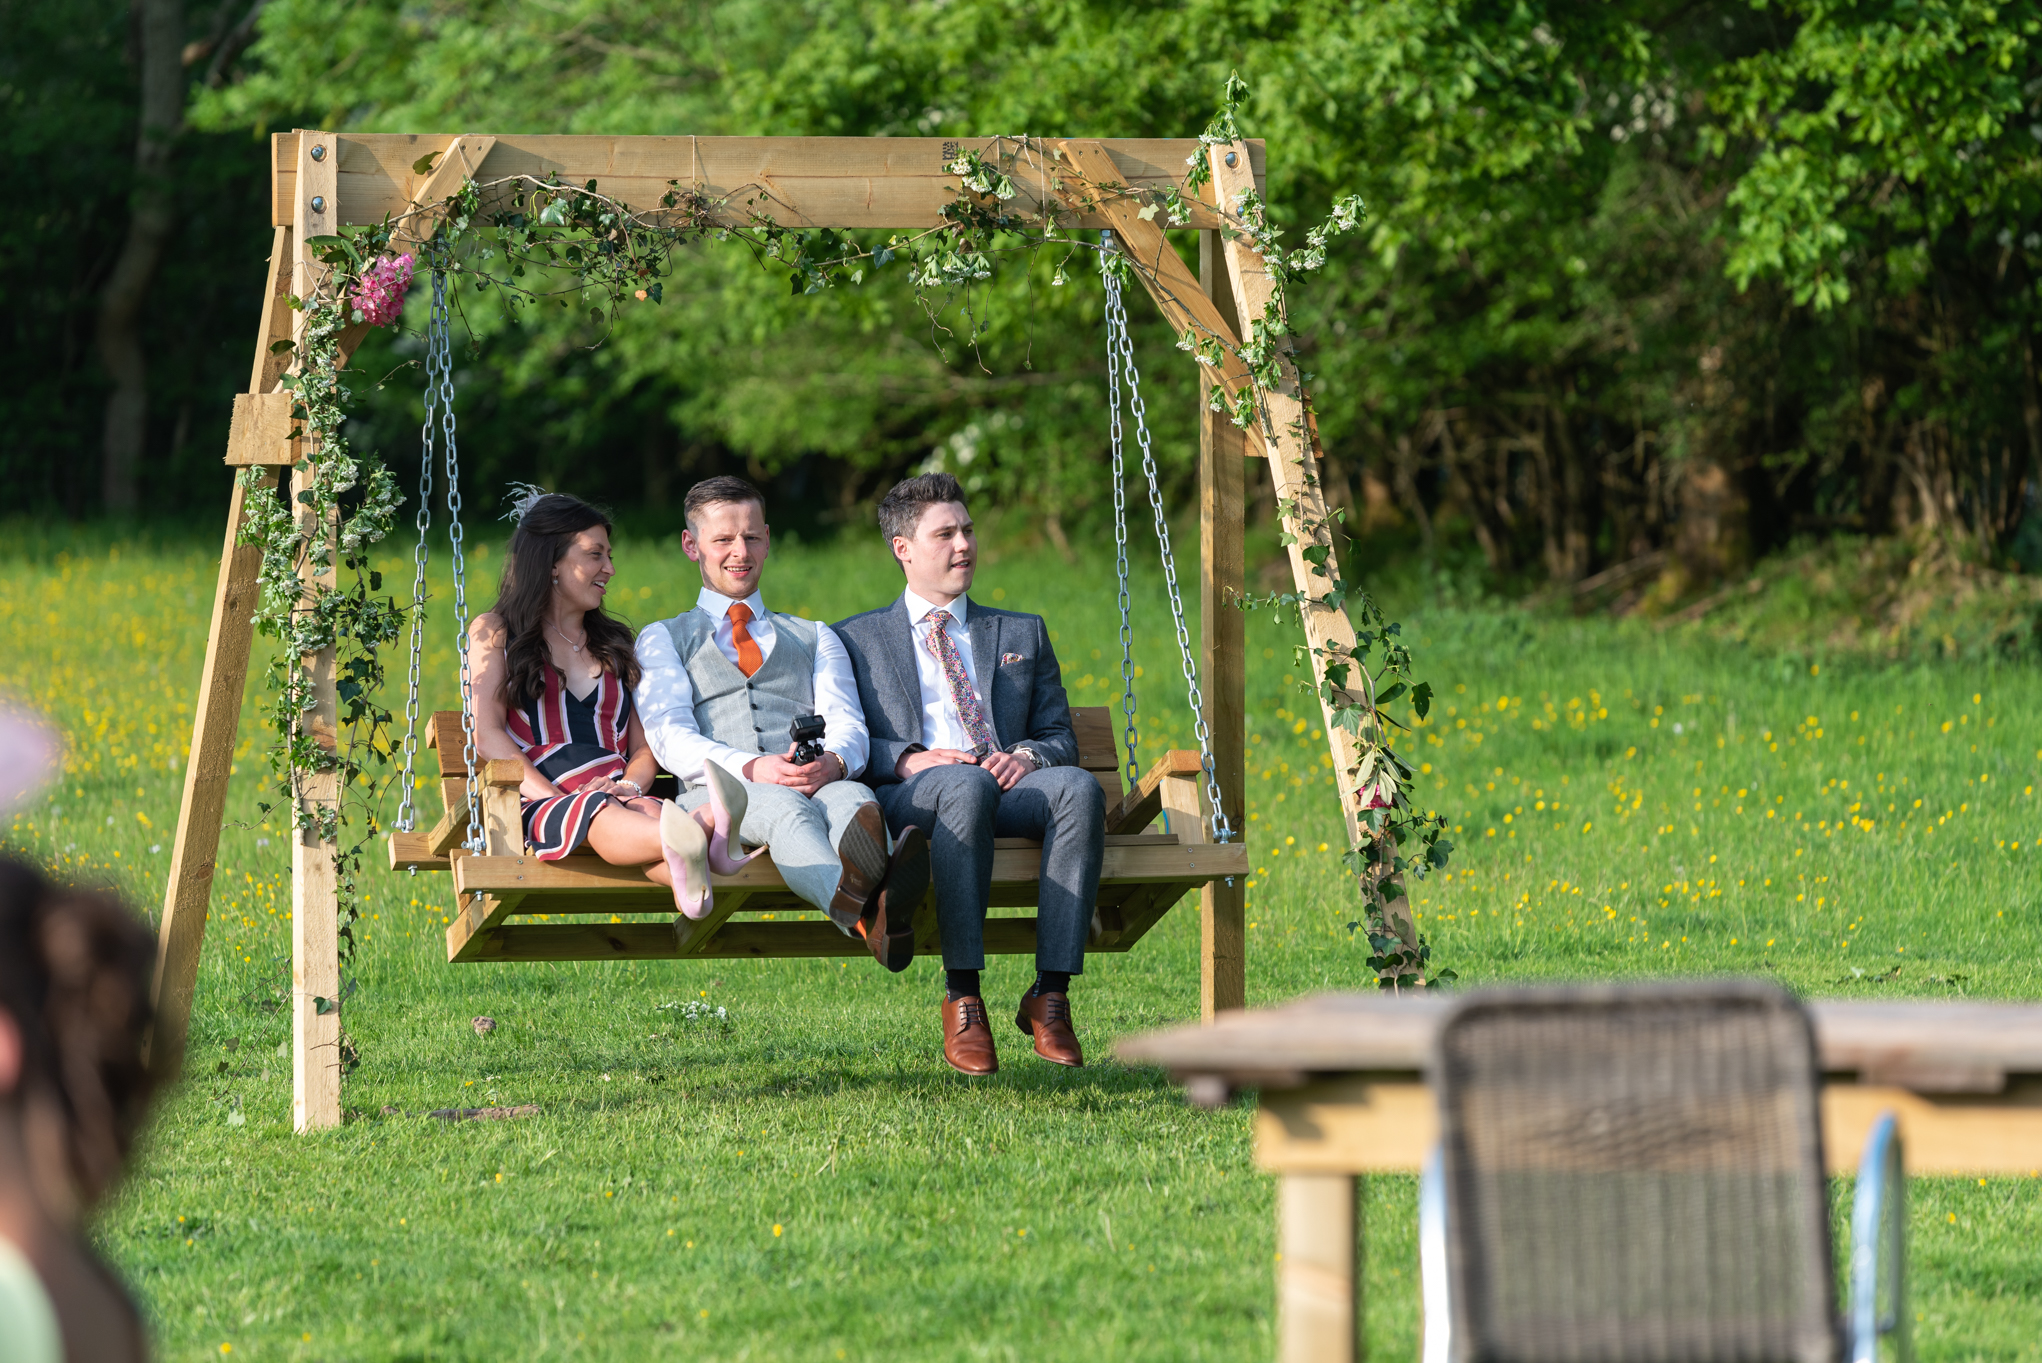 Wedding guests on swing - Powys Wedding Photography